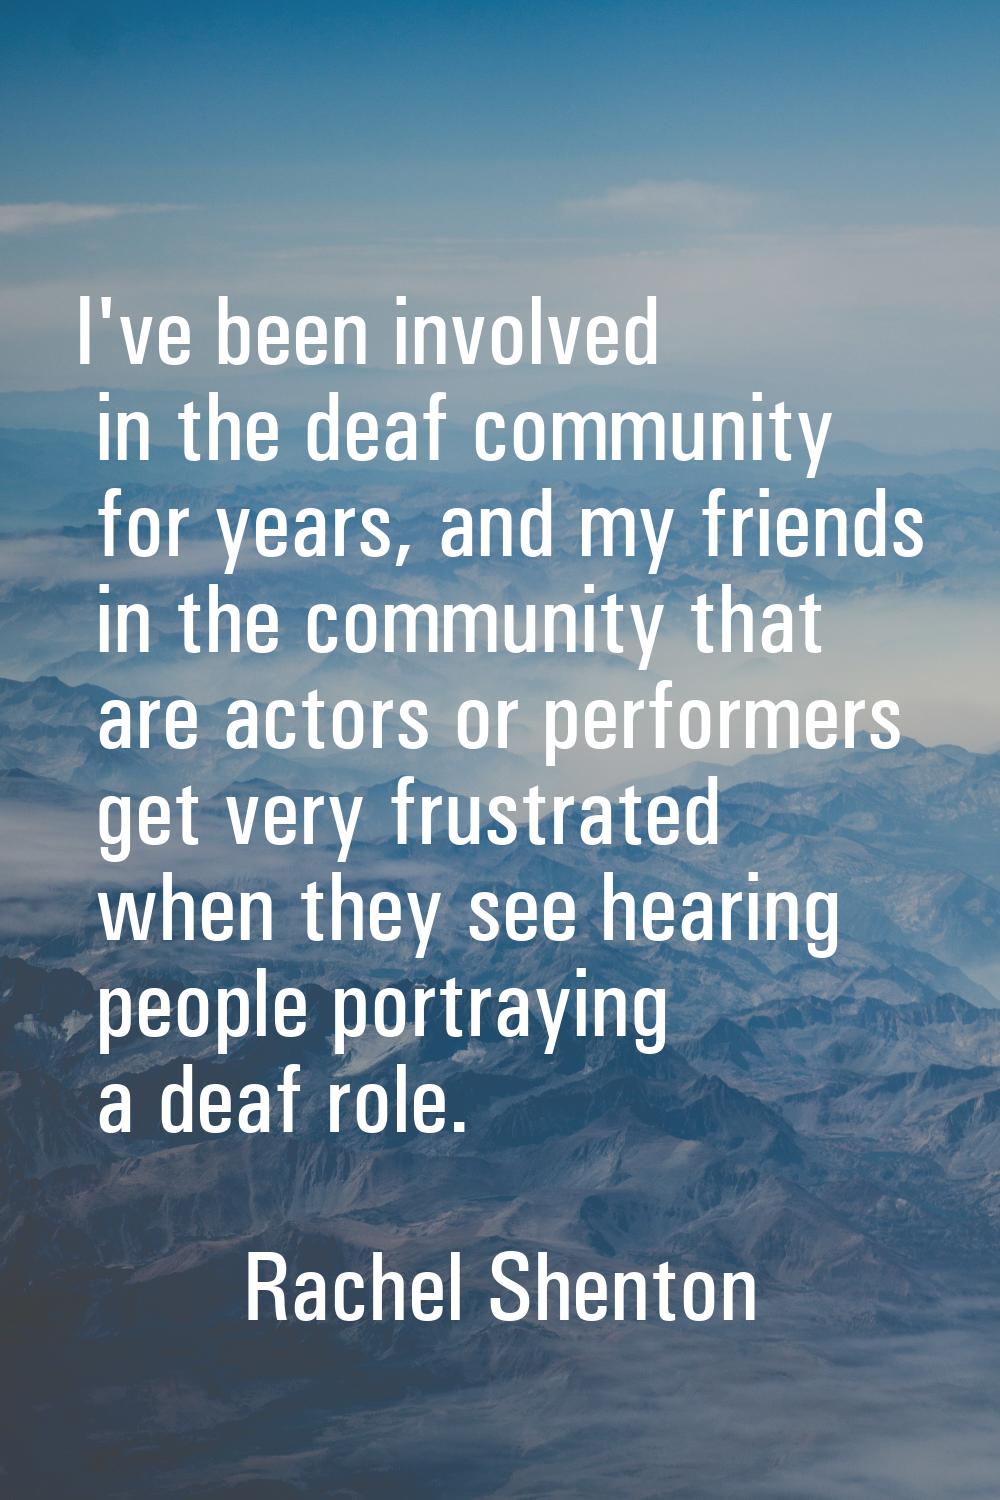 I've been involved in the deaf community for years, and my friends in the community that are actors